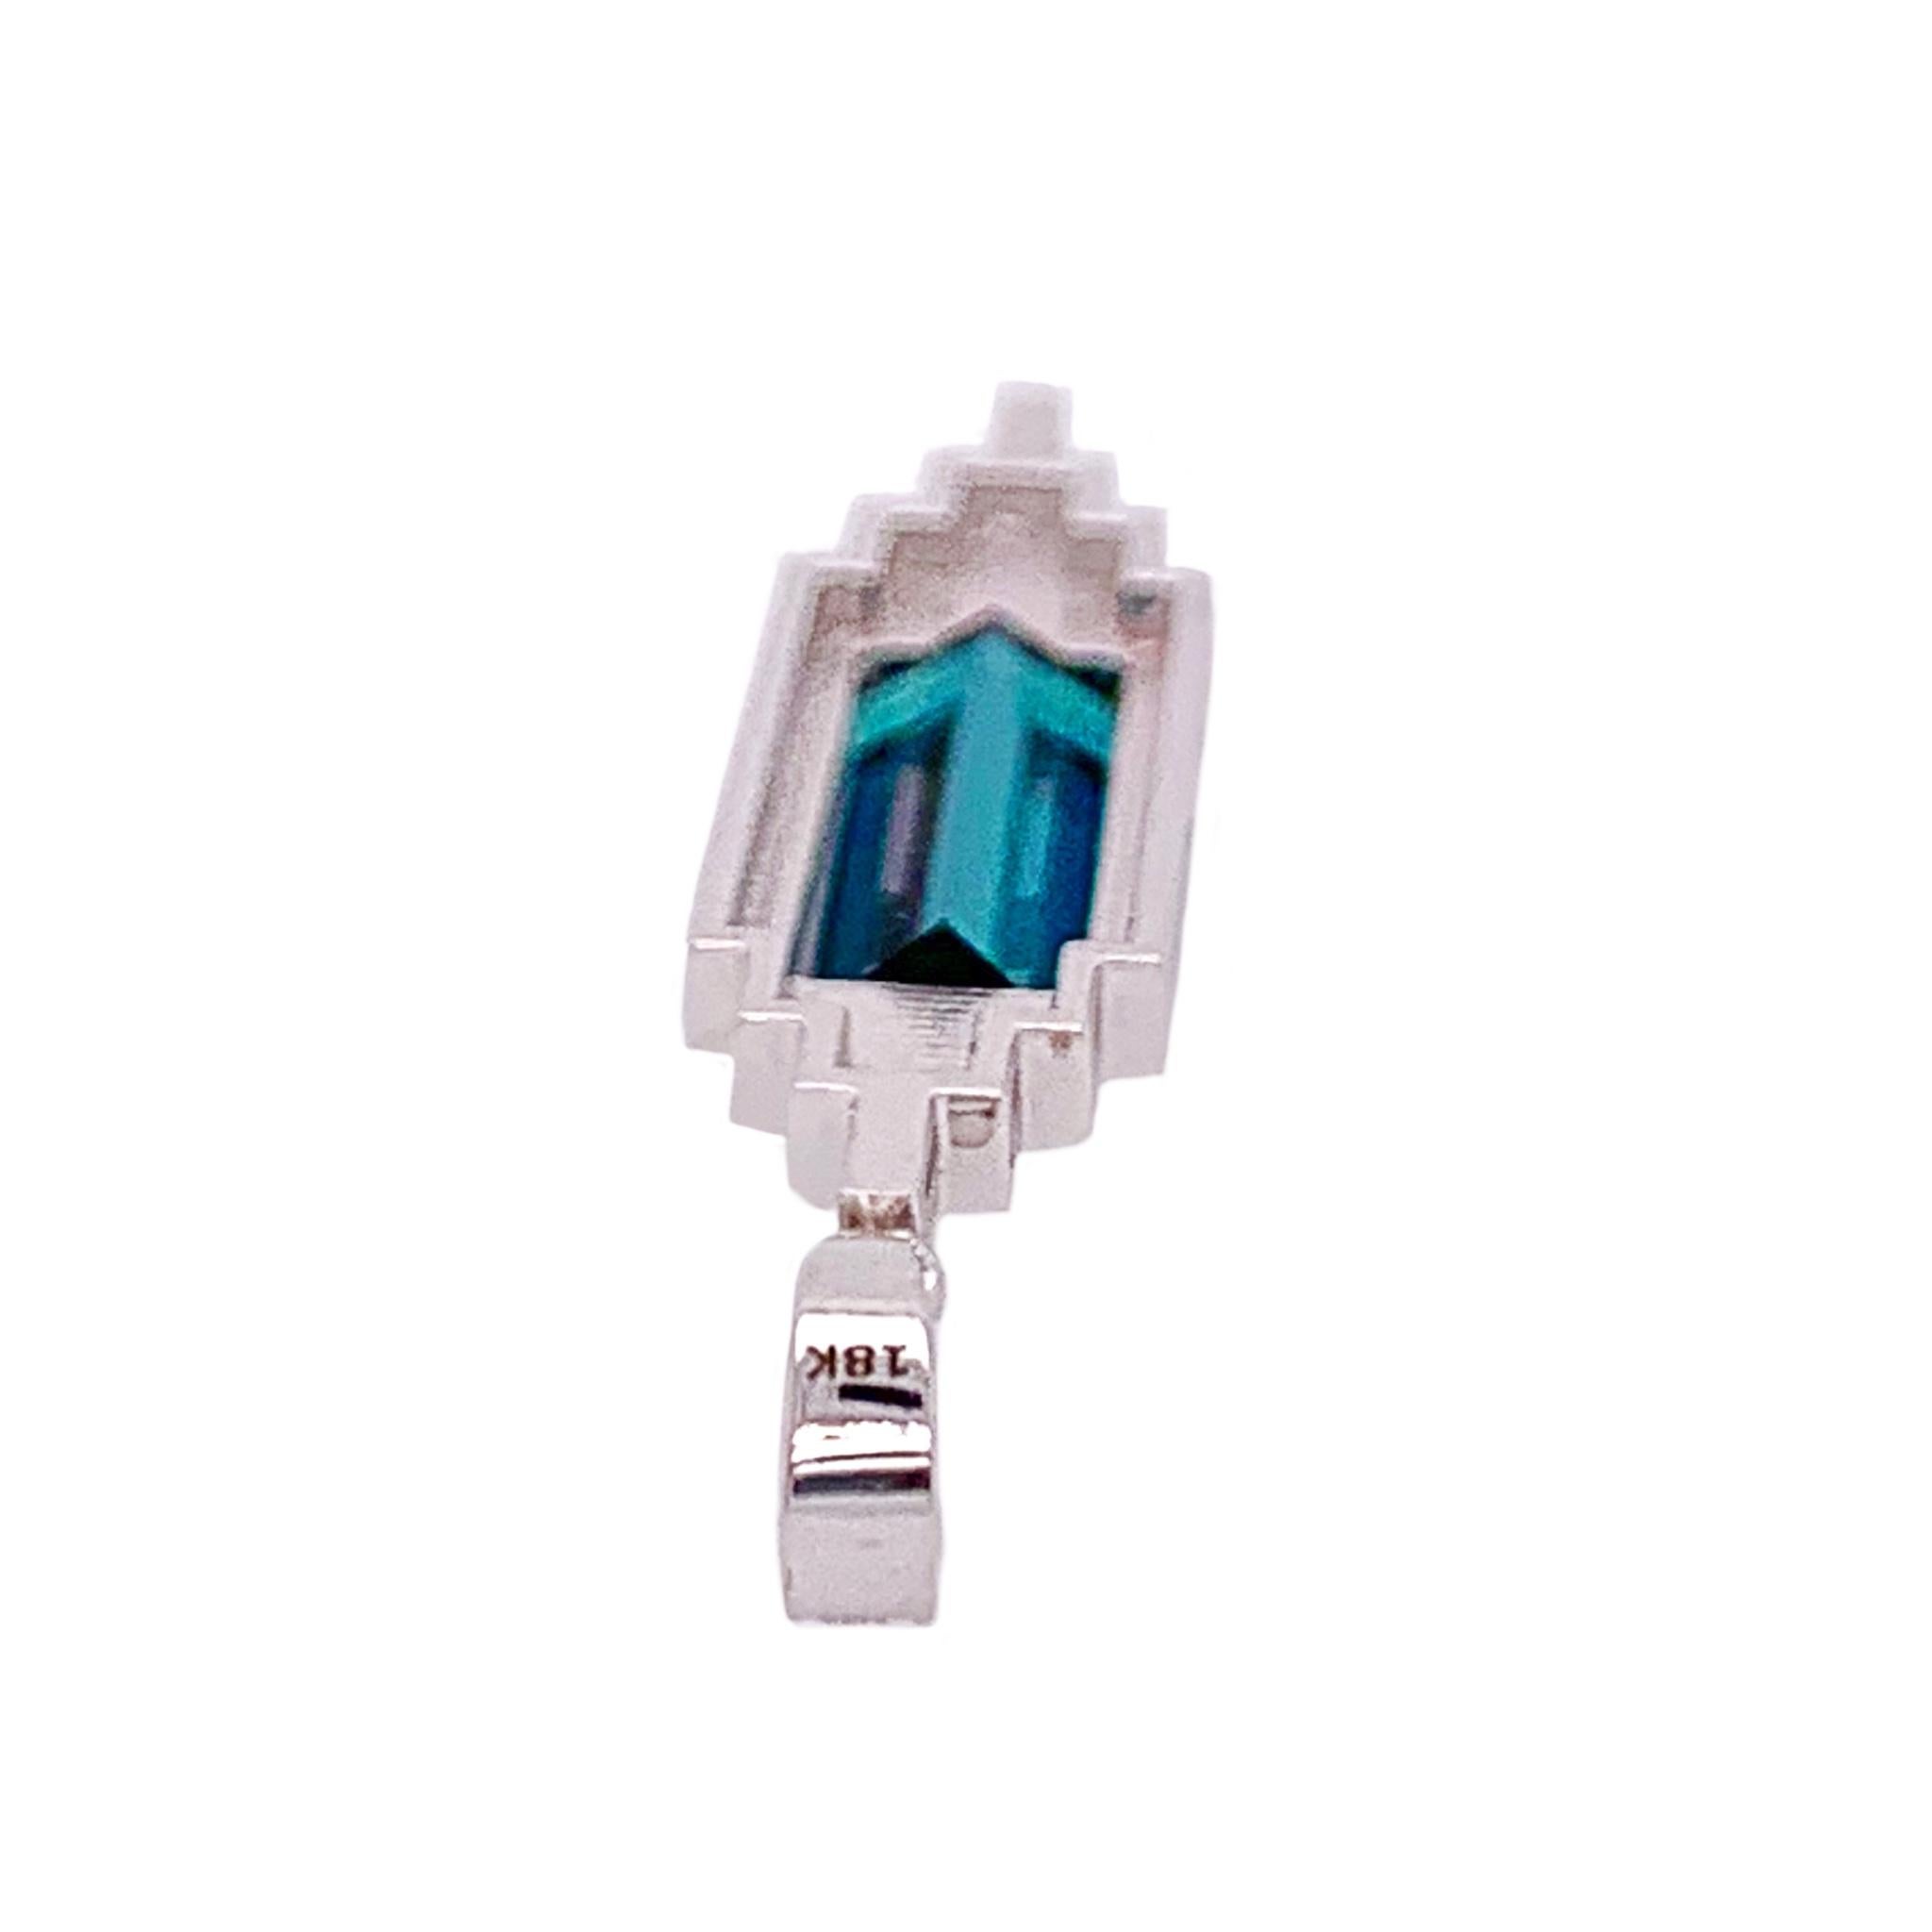 Brand new custom designed art deco style 18K white gold pendant set with a stunning emerald cut indicolite blue tourmaline weighing 2.90cts and 80 brilliant cut diamonds total weight of 0.88cts. They average VS2-SI1 clarity and G-H color.  Suspended